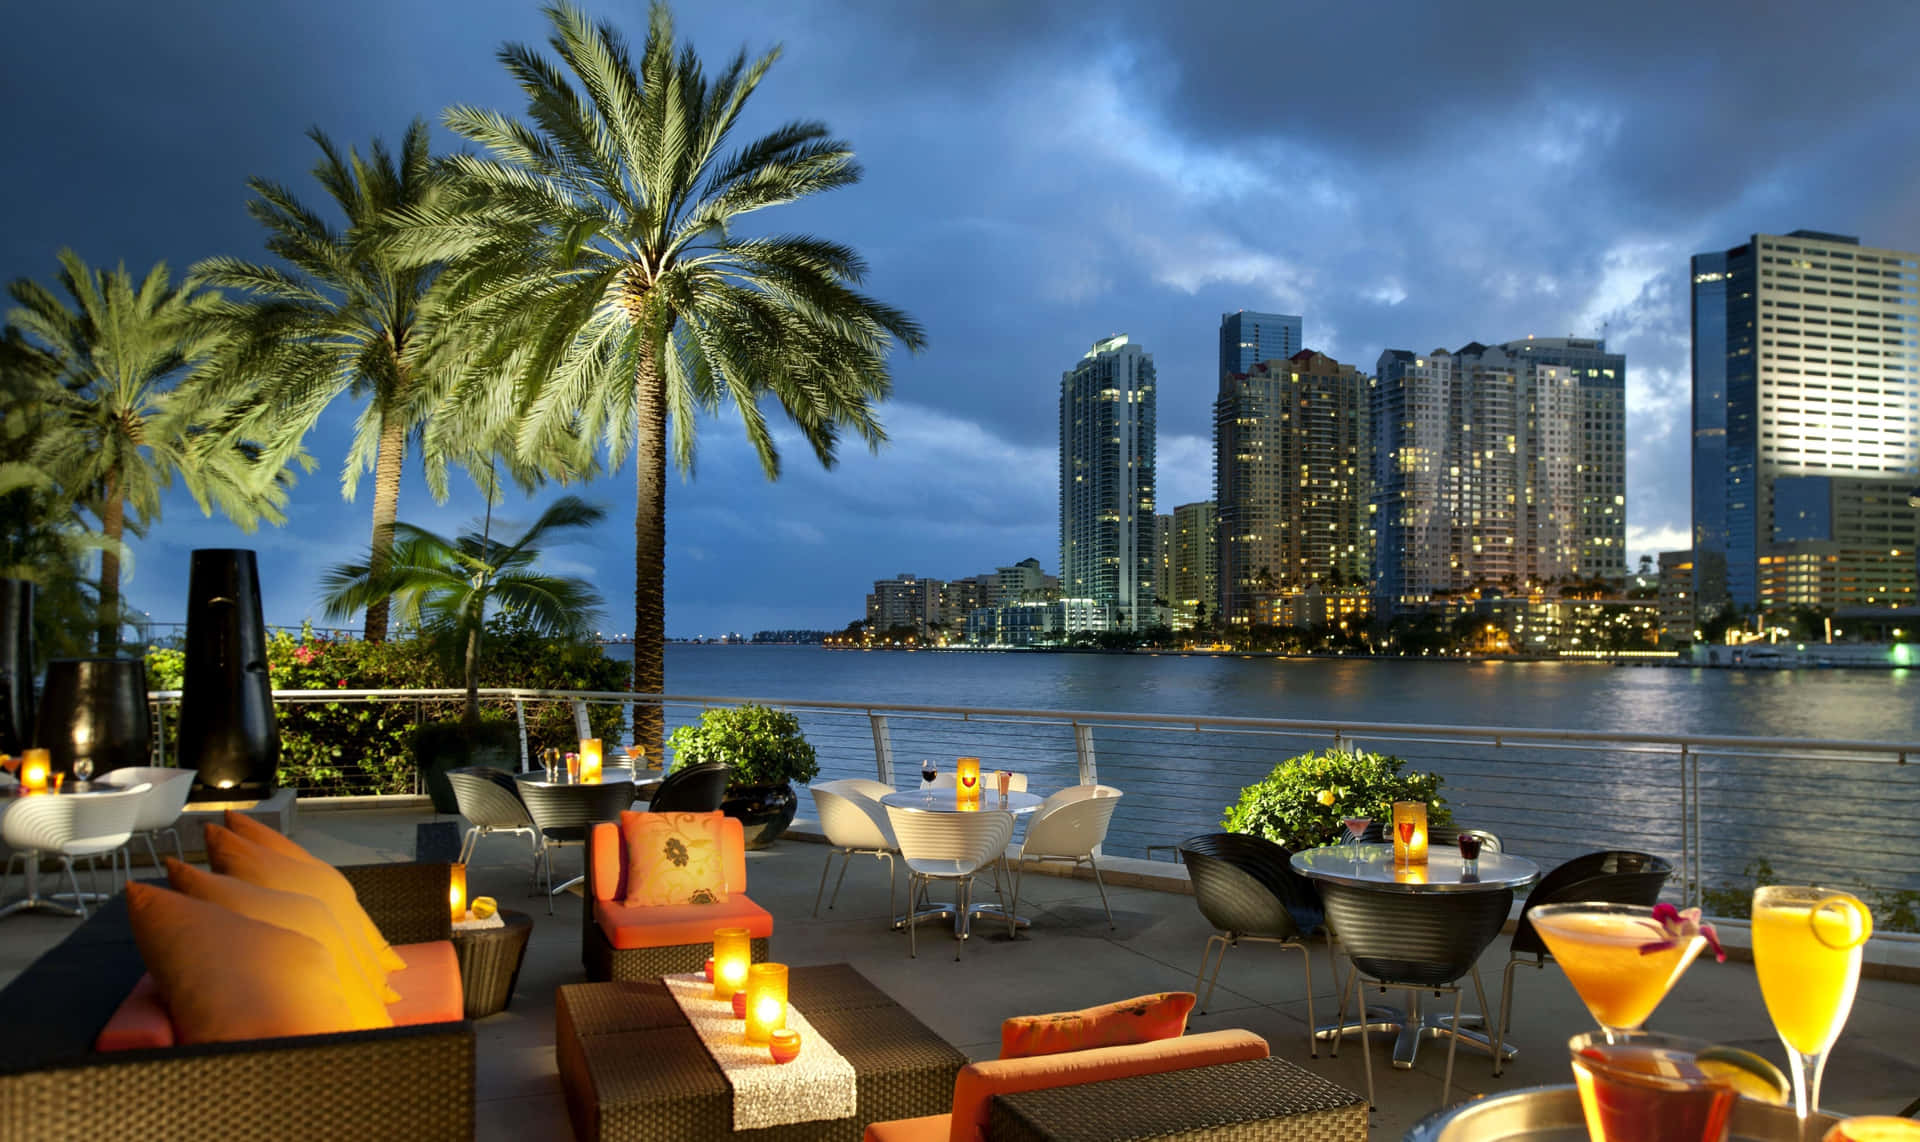 Bright Lights and Urban Cityscapes - Welcome to Miami!